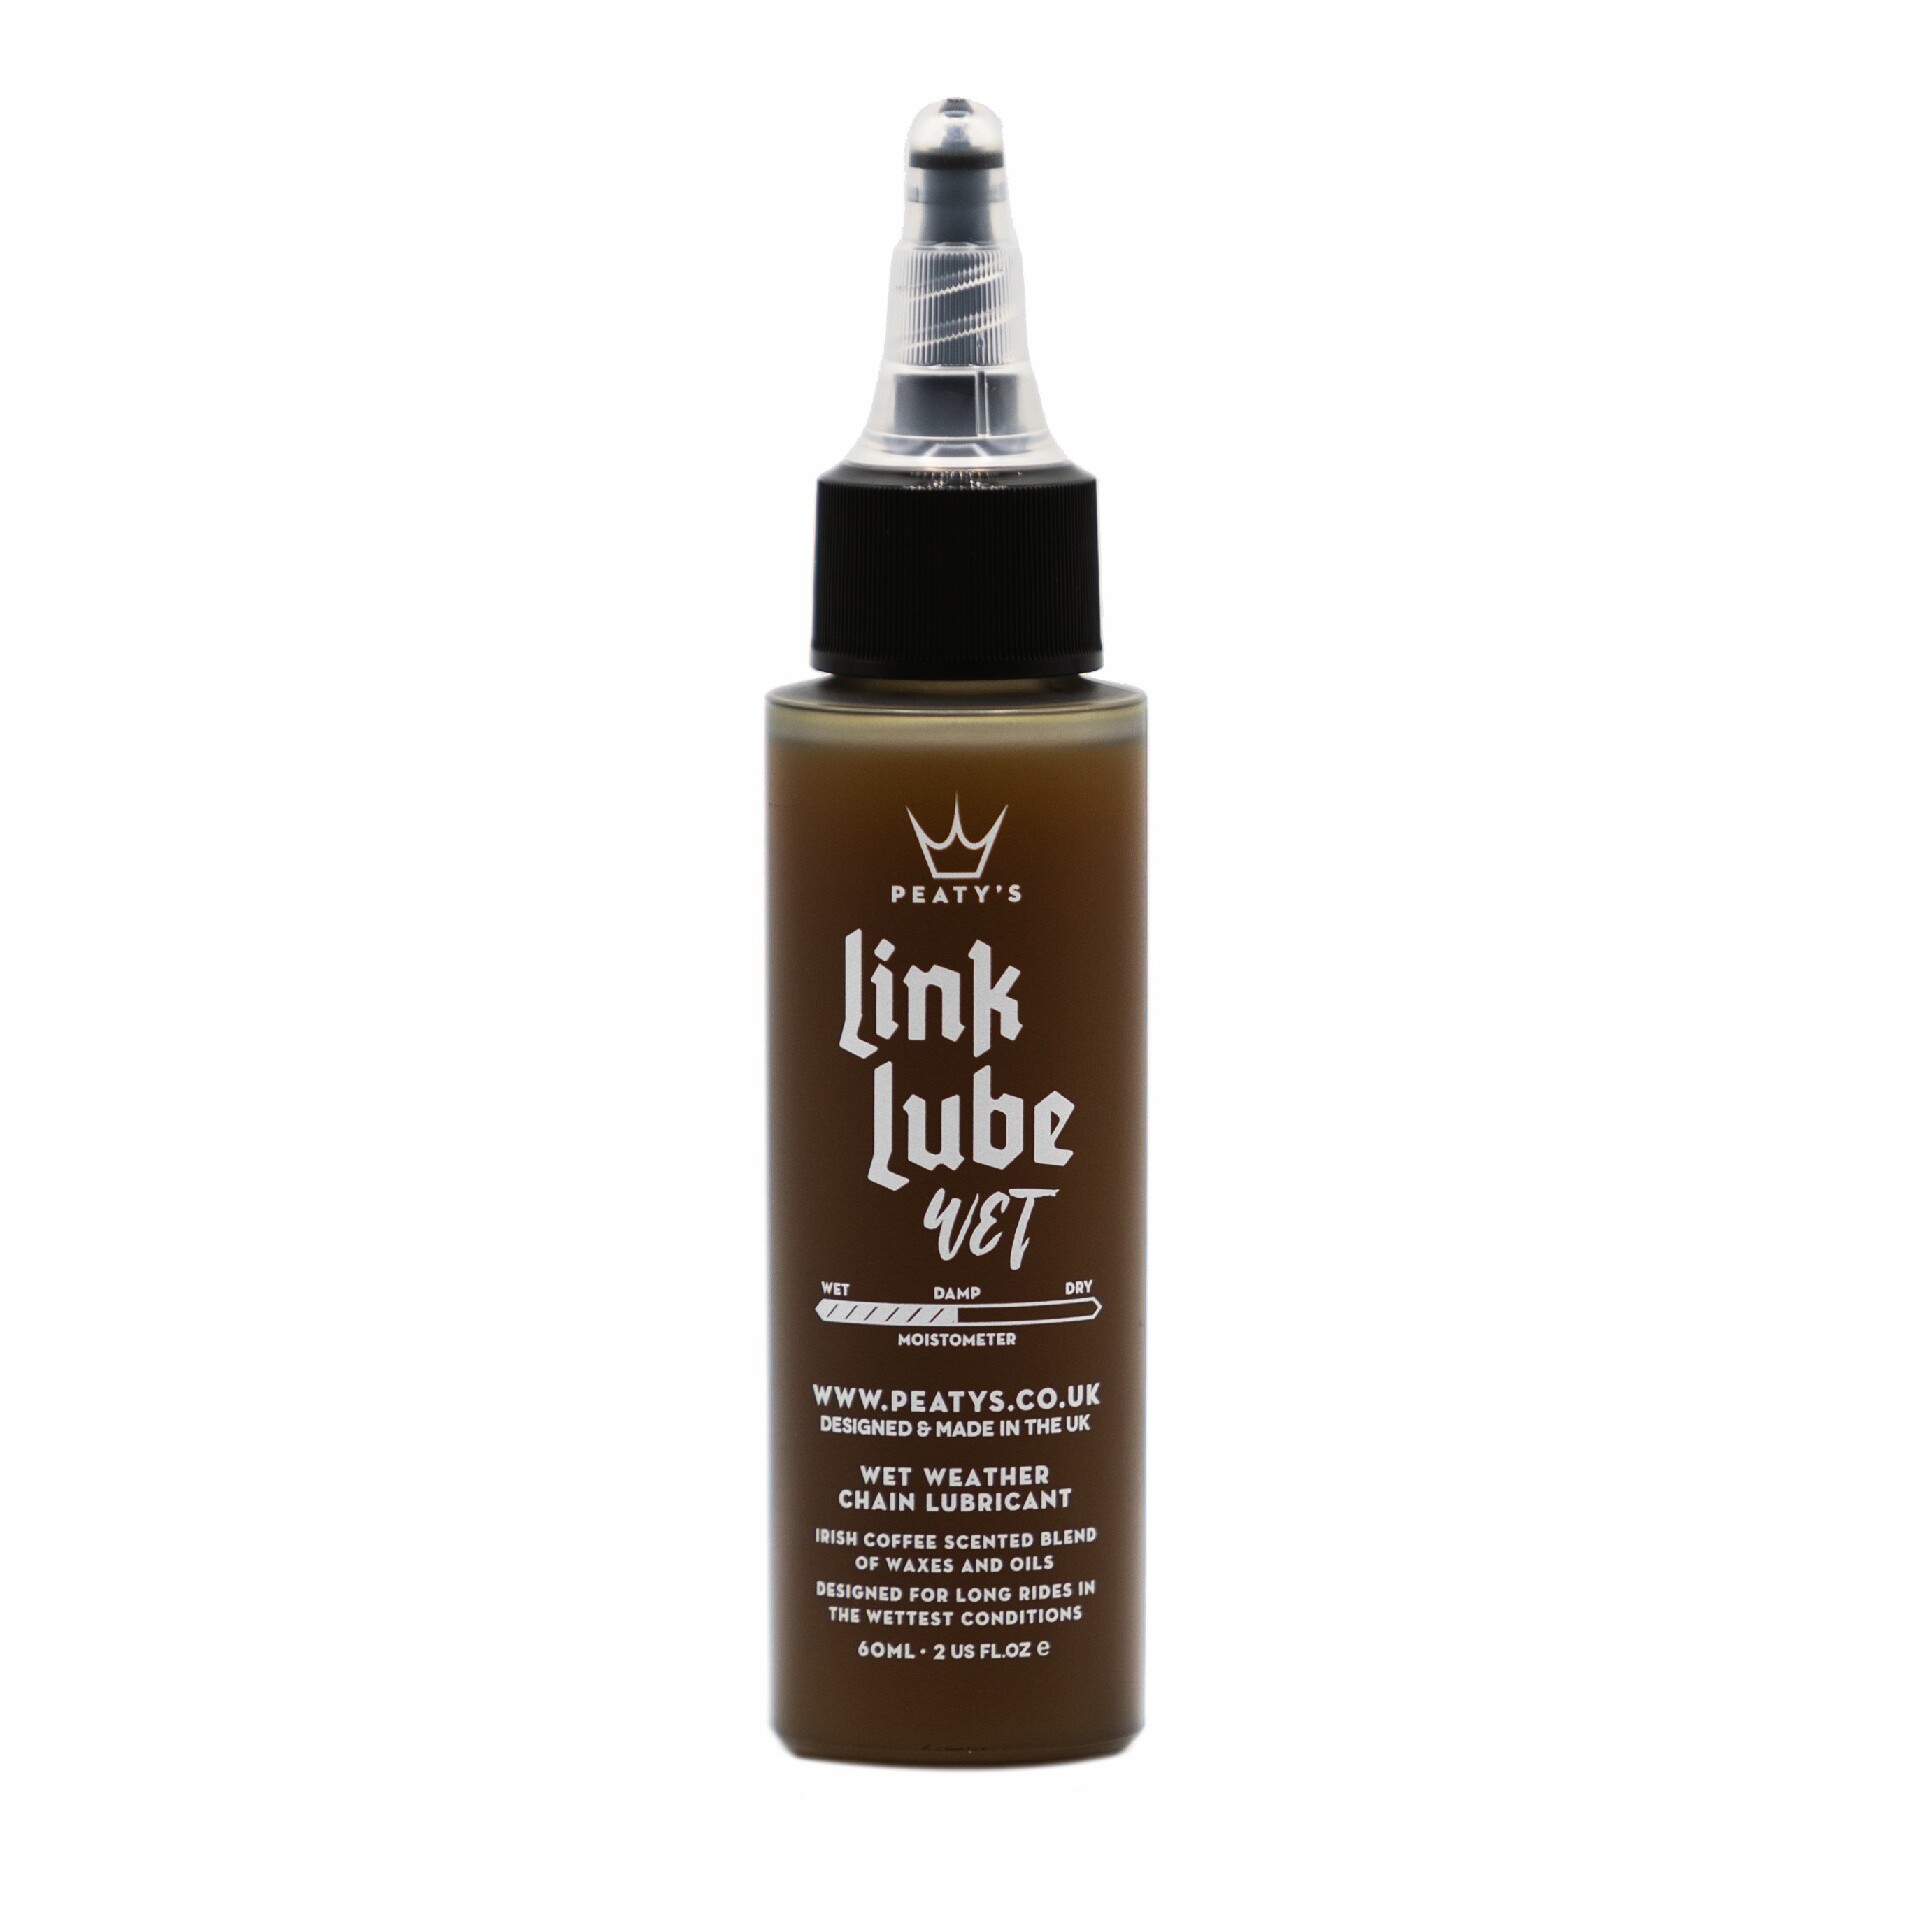 Photo Lubrifiant pour condition humide Peaty's Link Lube